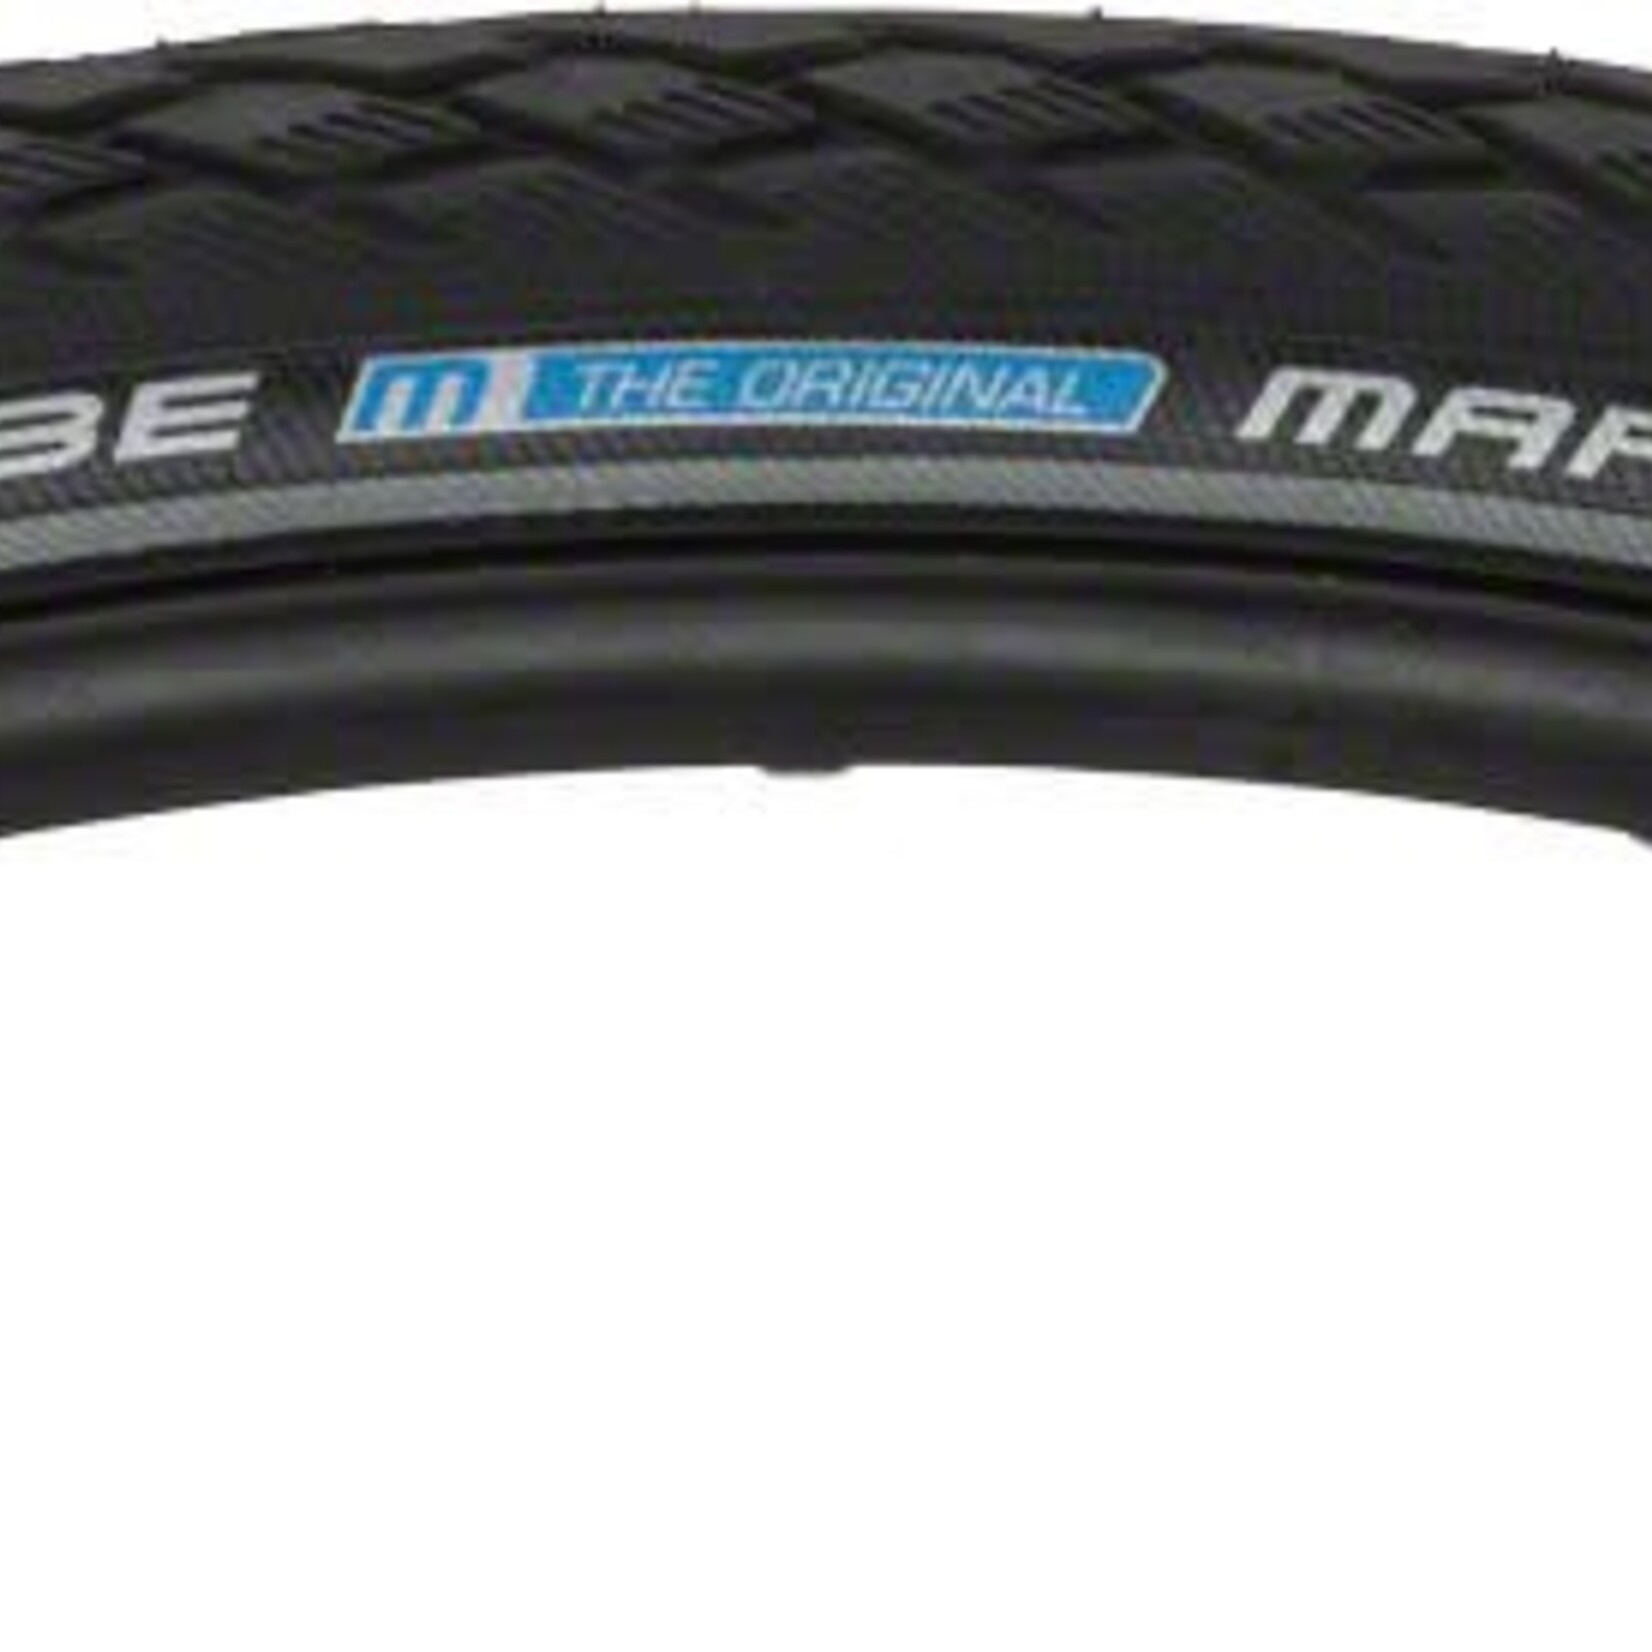 Schwalbe Schwalbe Marathon Tire, 700x35 Wire Bead Black with Reflective Sidewall and GreenGuard Protection